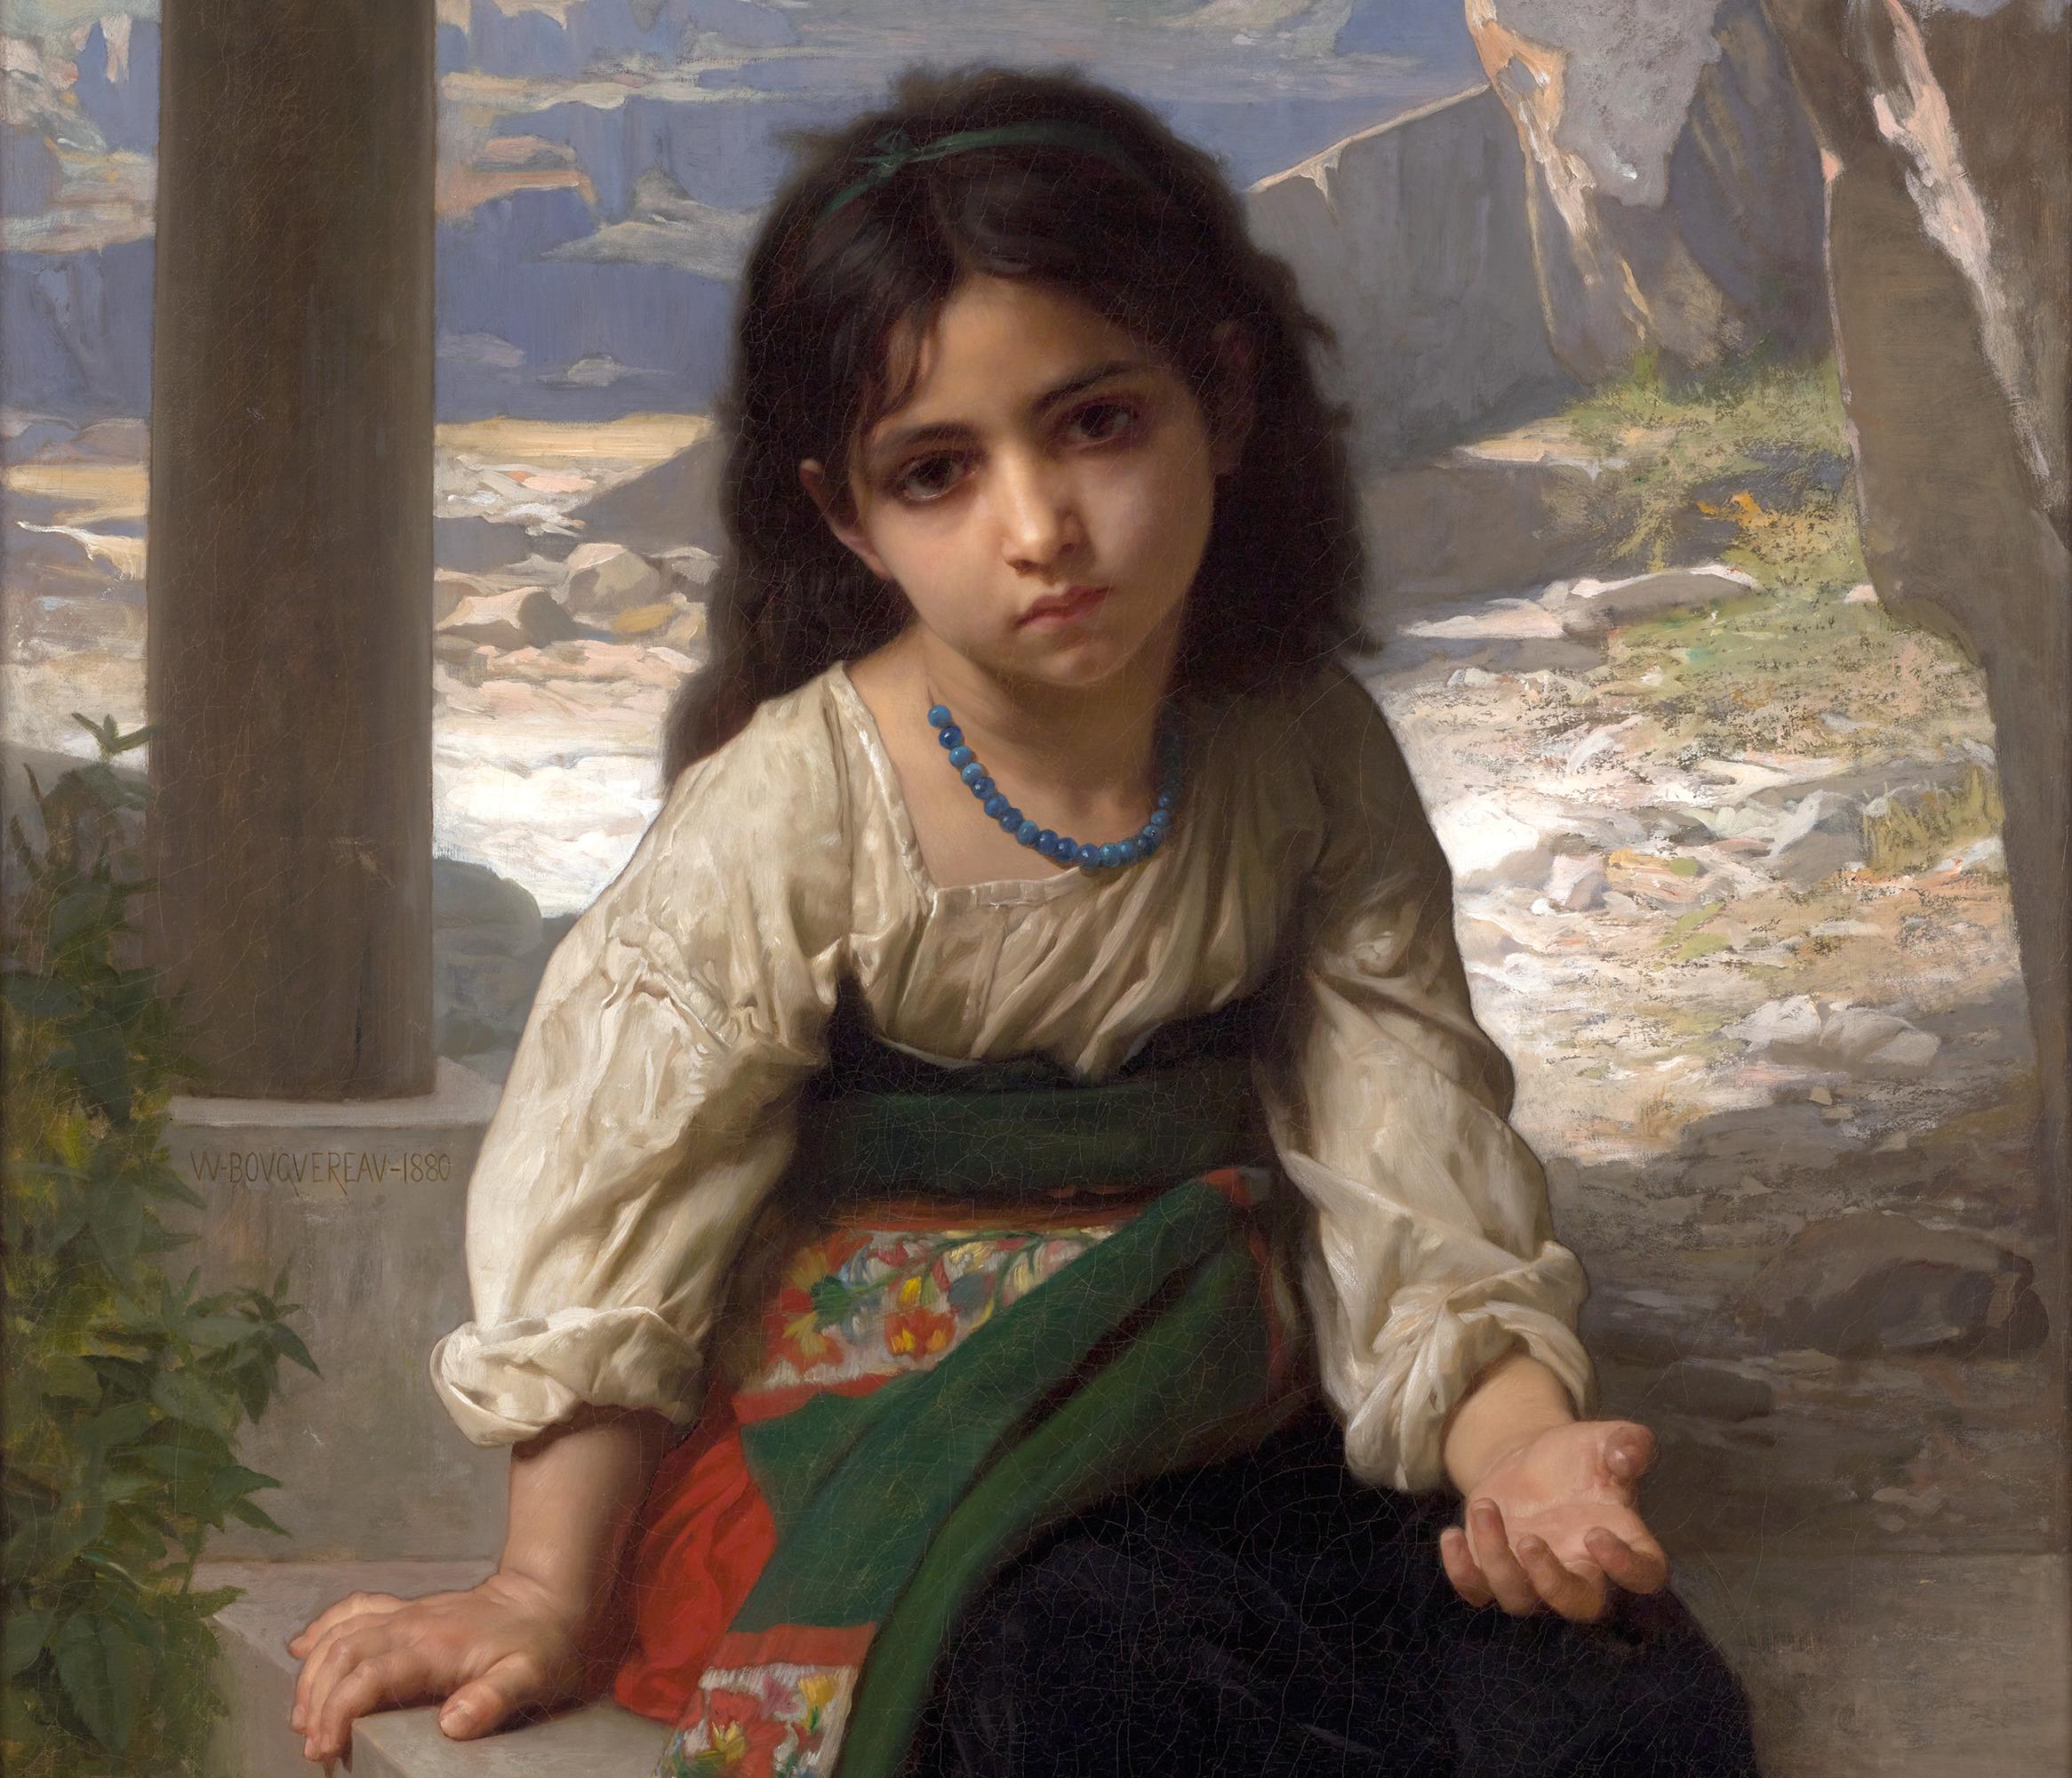 William Bouguereau
French  1825-1905

Petite Mendiante
(Little Beggar)

Signed “W. Bouguereau 1880” (center left)
Oil on canvas

William Bouguereau's faithful images of young women as beggars, gypsies and shepherdesses are an eternal expression of